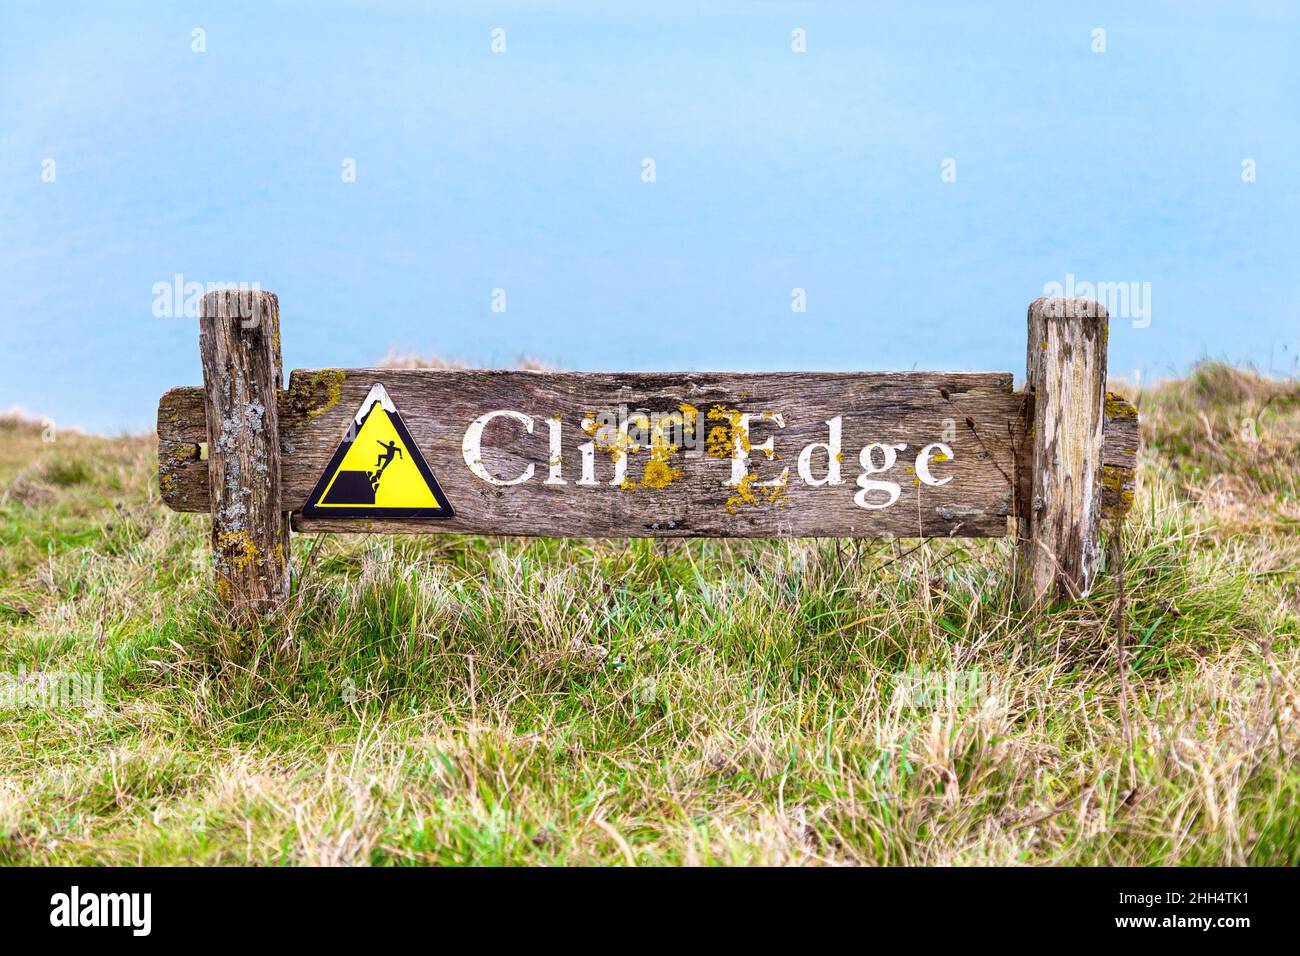 Cliff Edge sign at Beachy Head, Eastbourne, UK Stock Photo